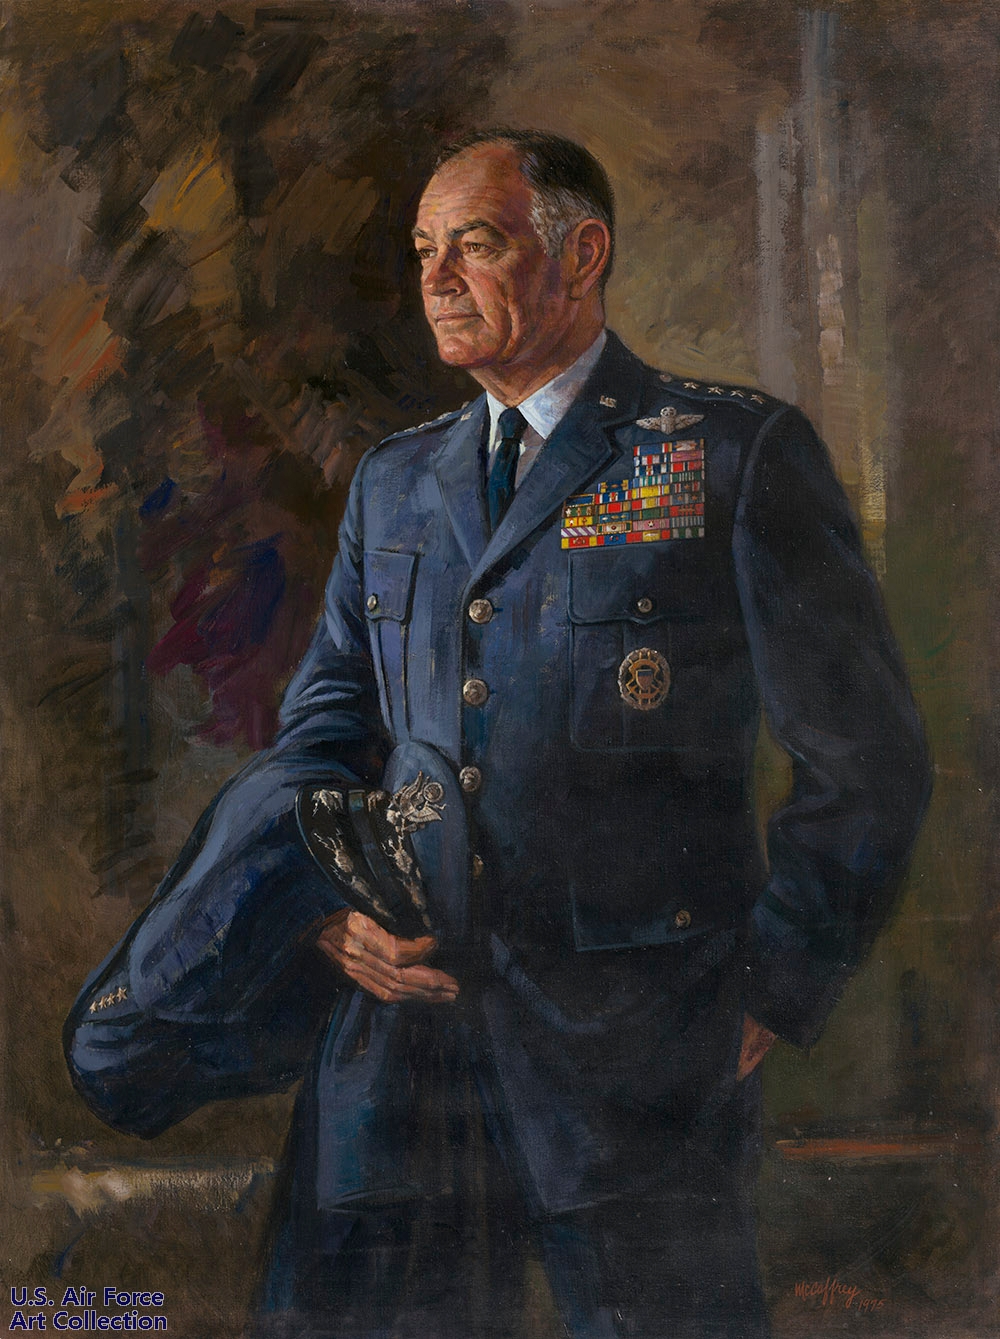 GENERAL GEORGE S BROWN - CHIEF OF STAFF, UNITED STATES AIR FORCE 1973 - 1974